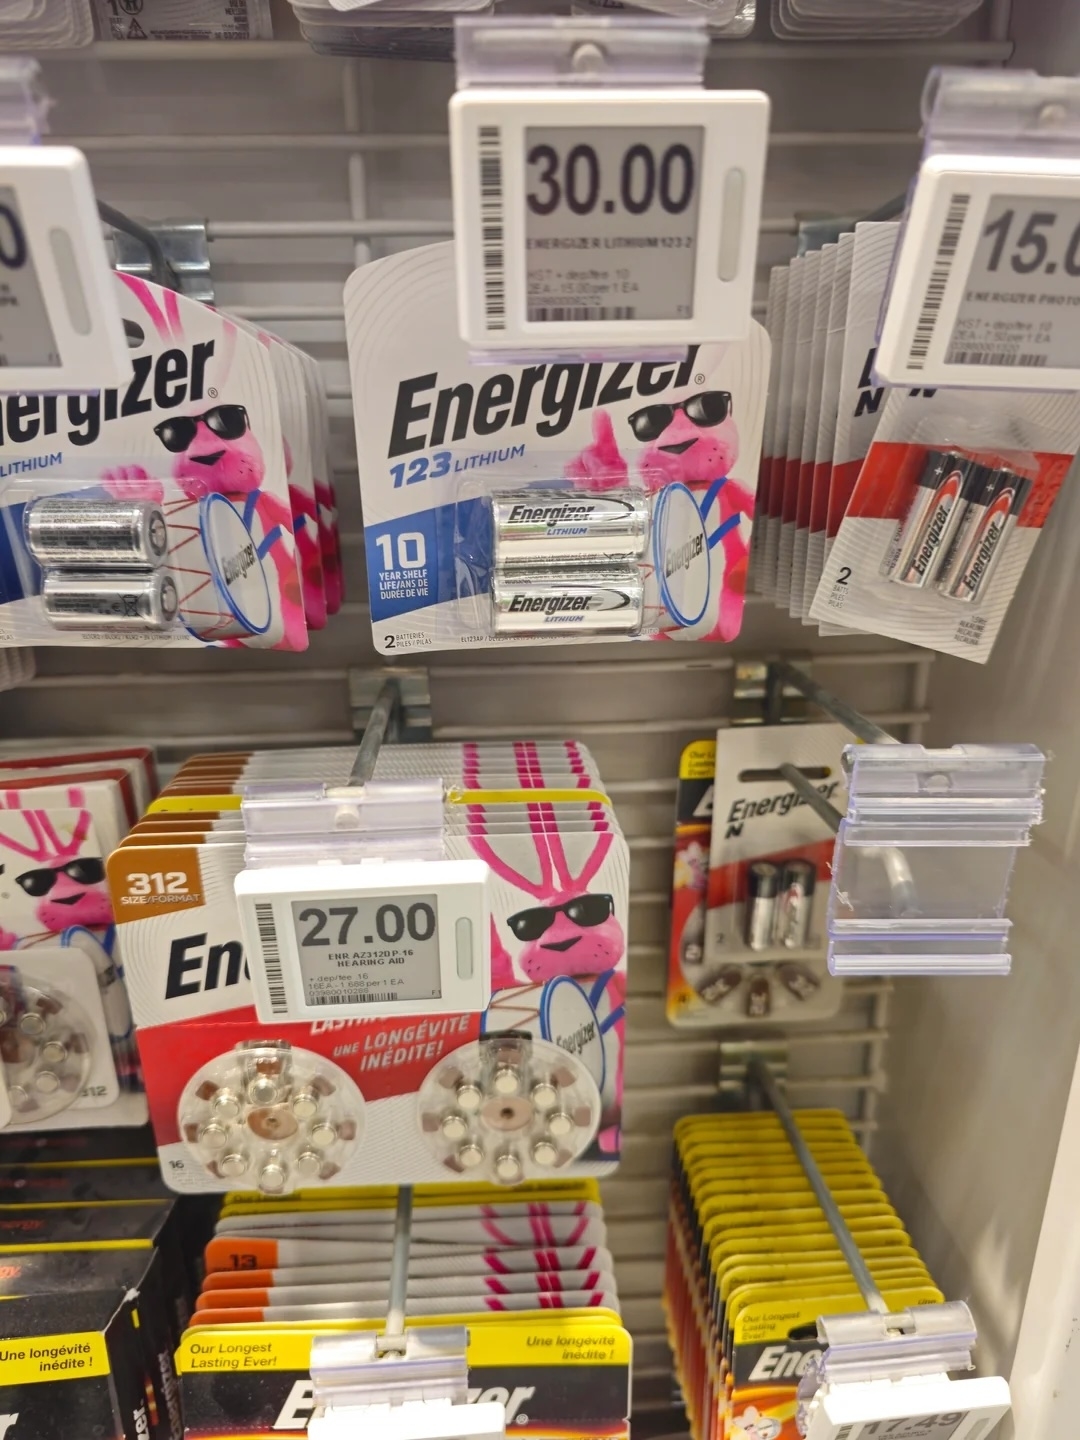 Energizer lithium batteries on store shelf with price tags, obstructed by stickers of a character with sunglasses